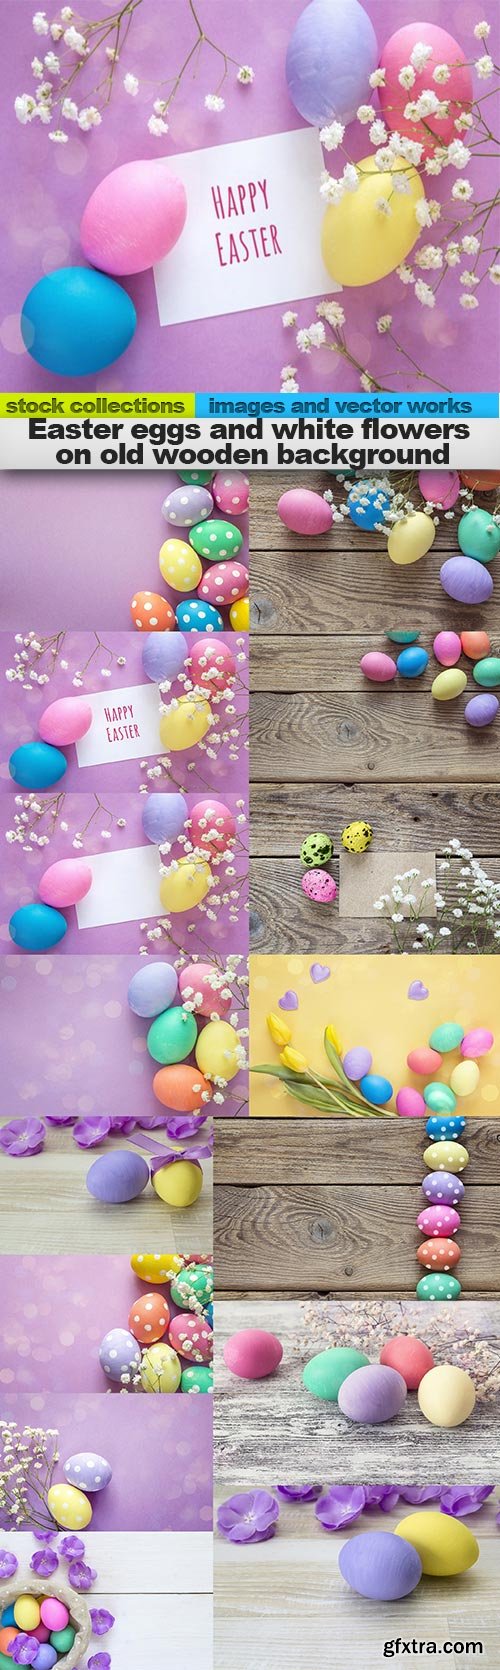 Easter eggs and white flowers on old wooden background, 15 x UHQ JPEG